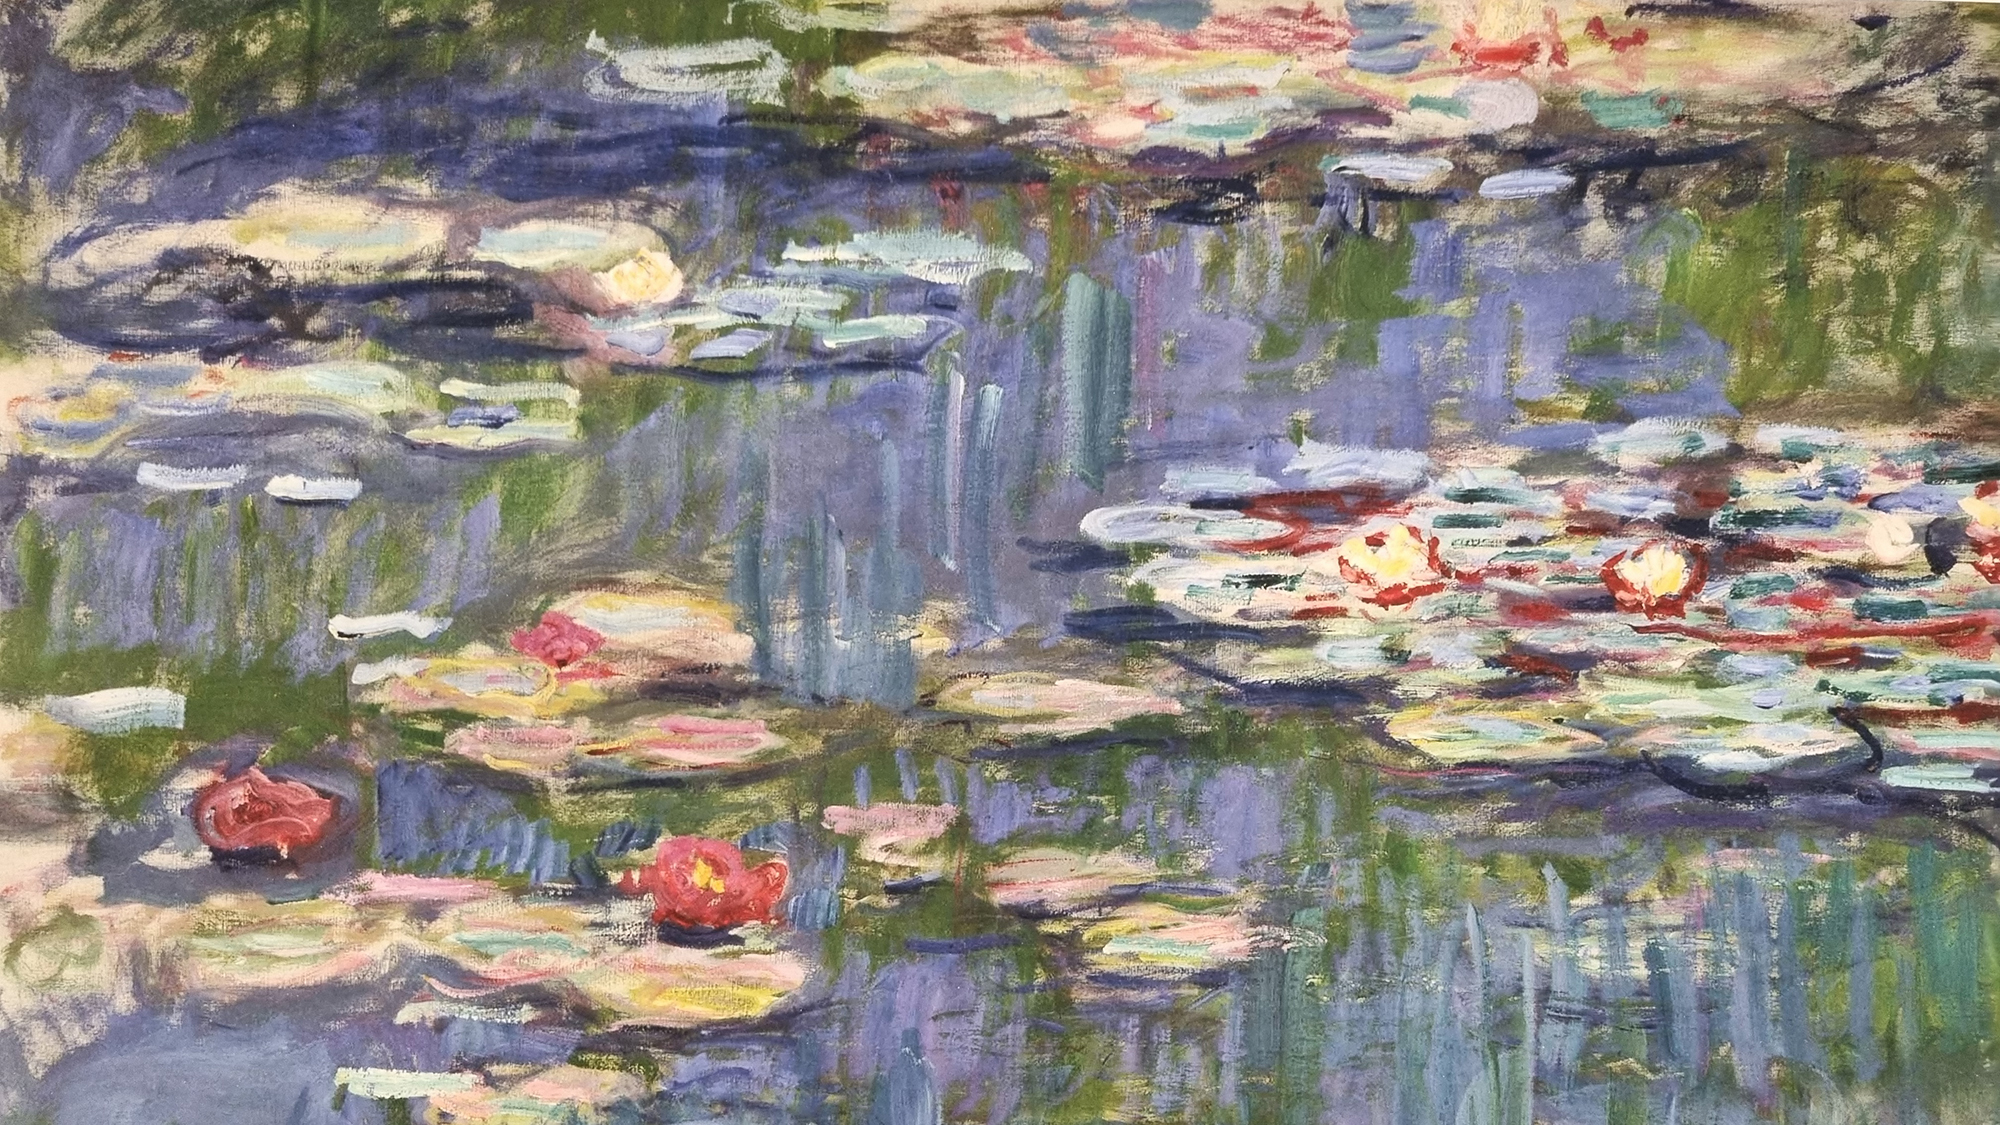 Claude Monet Limited Edition "Water Lilies, 1916" One of only 95 Published. - Image 6 of 7